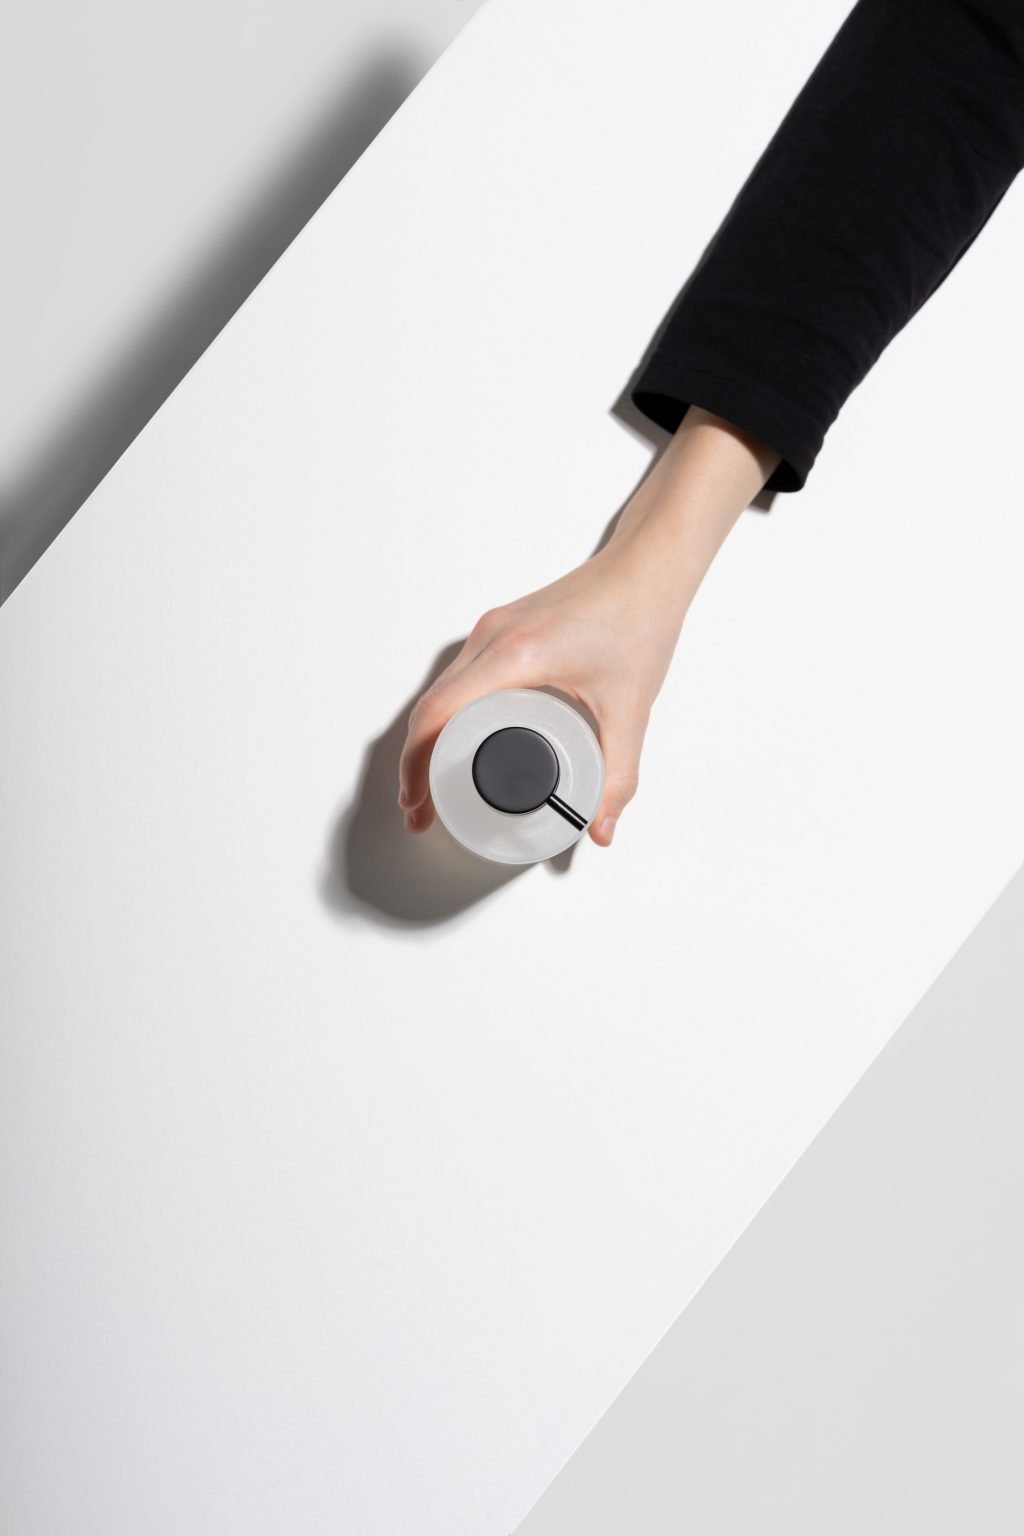 Minimalist In Form, Forgo Encourages The Sustainable Future Of Products ...